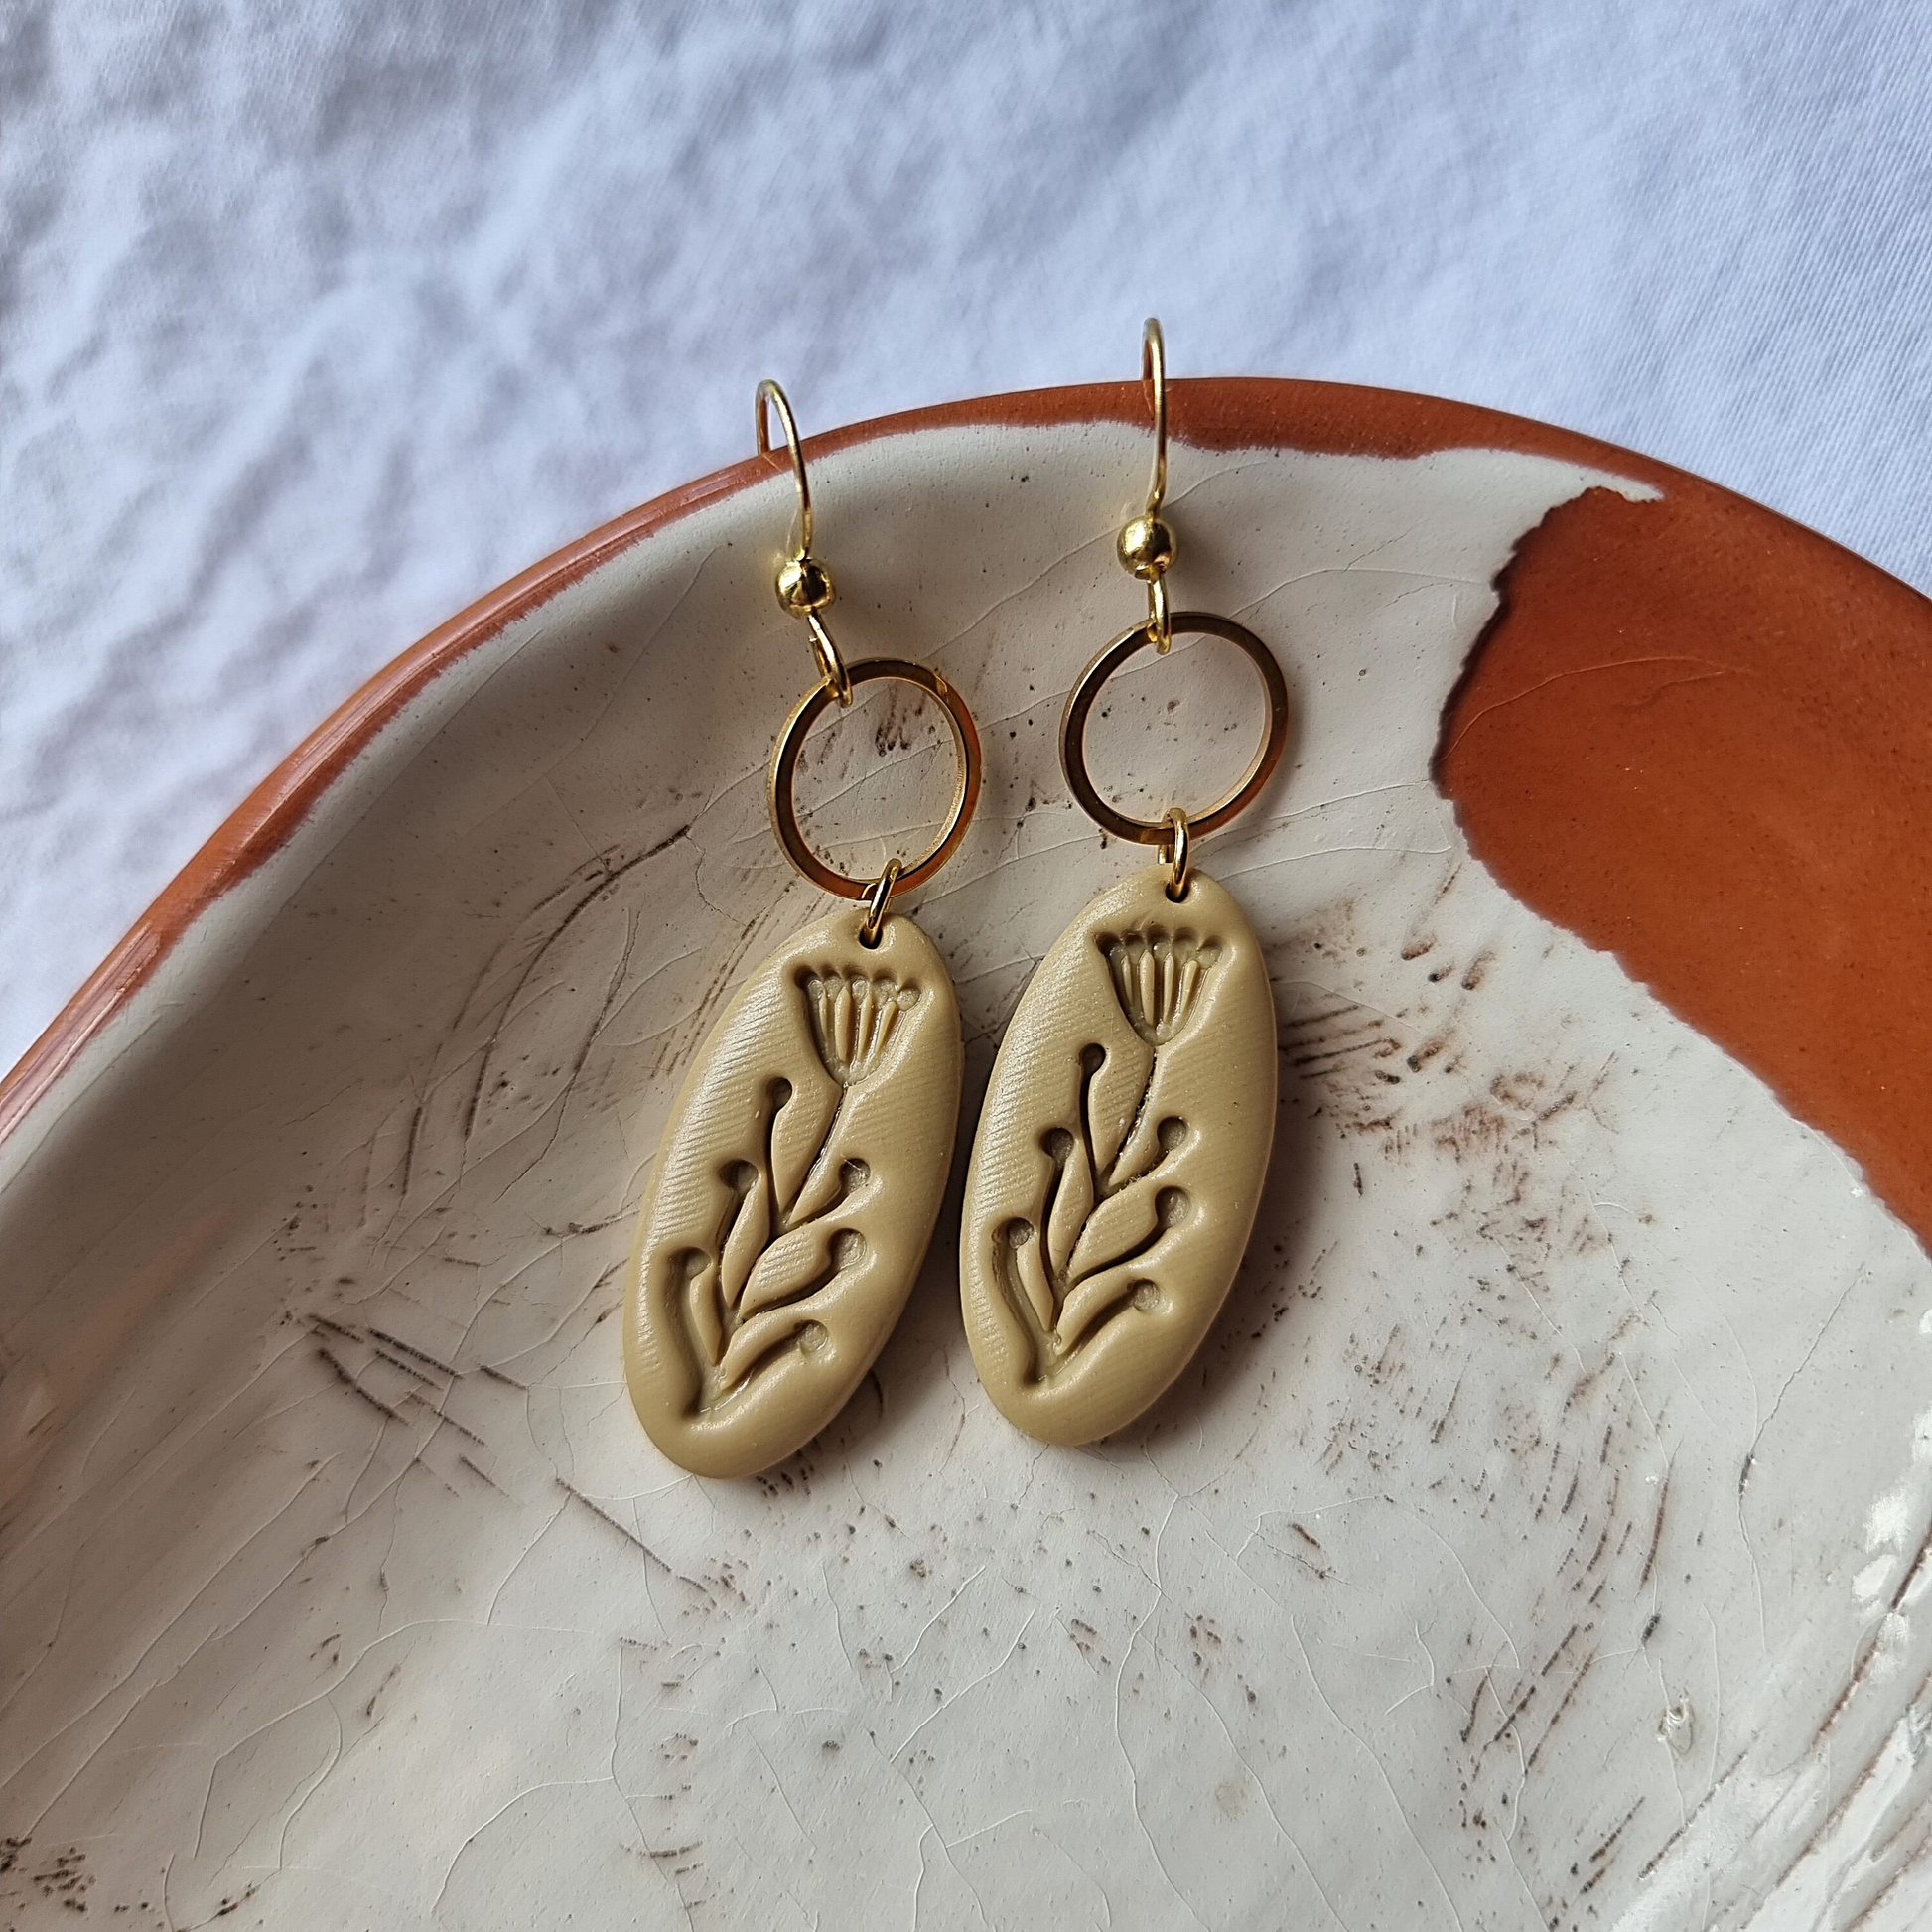 Elegance in simplicity with our unique oval-shaped polymer clay earrings. Earthy colors and delicate flower embossing add a touch of nature-inspired charm.